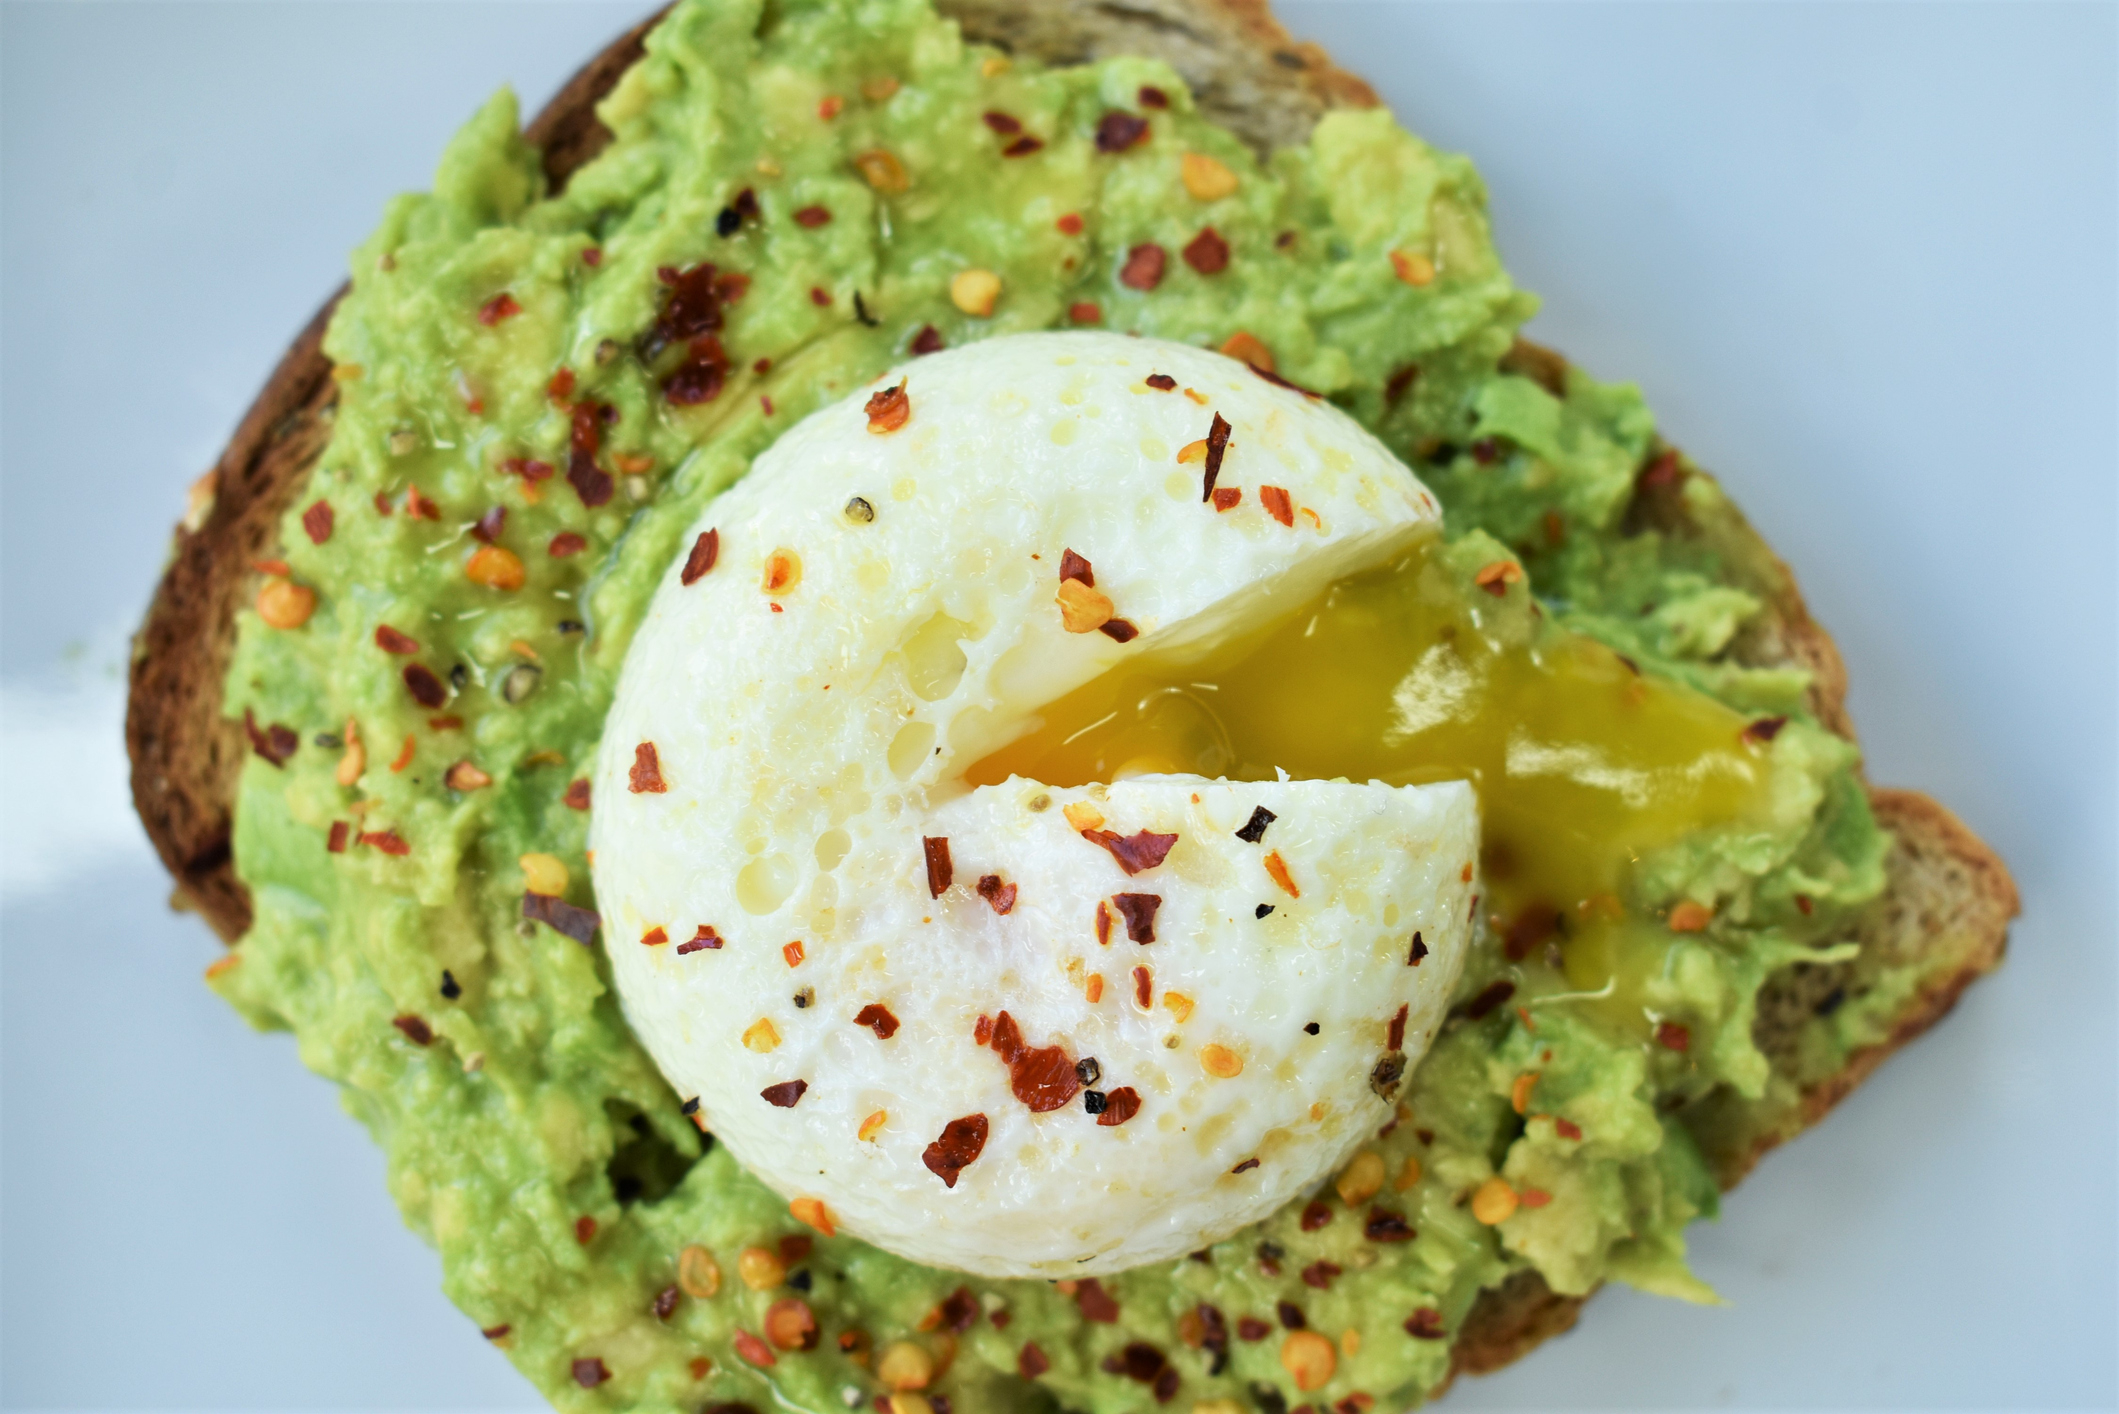 A runny egg sits on top of avocado toast